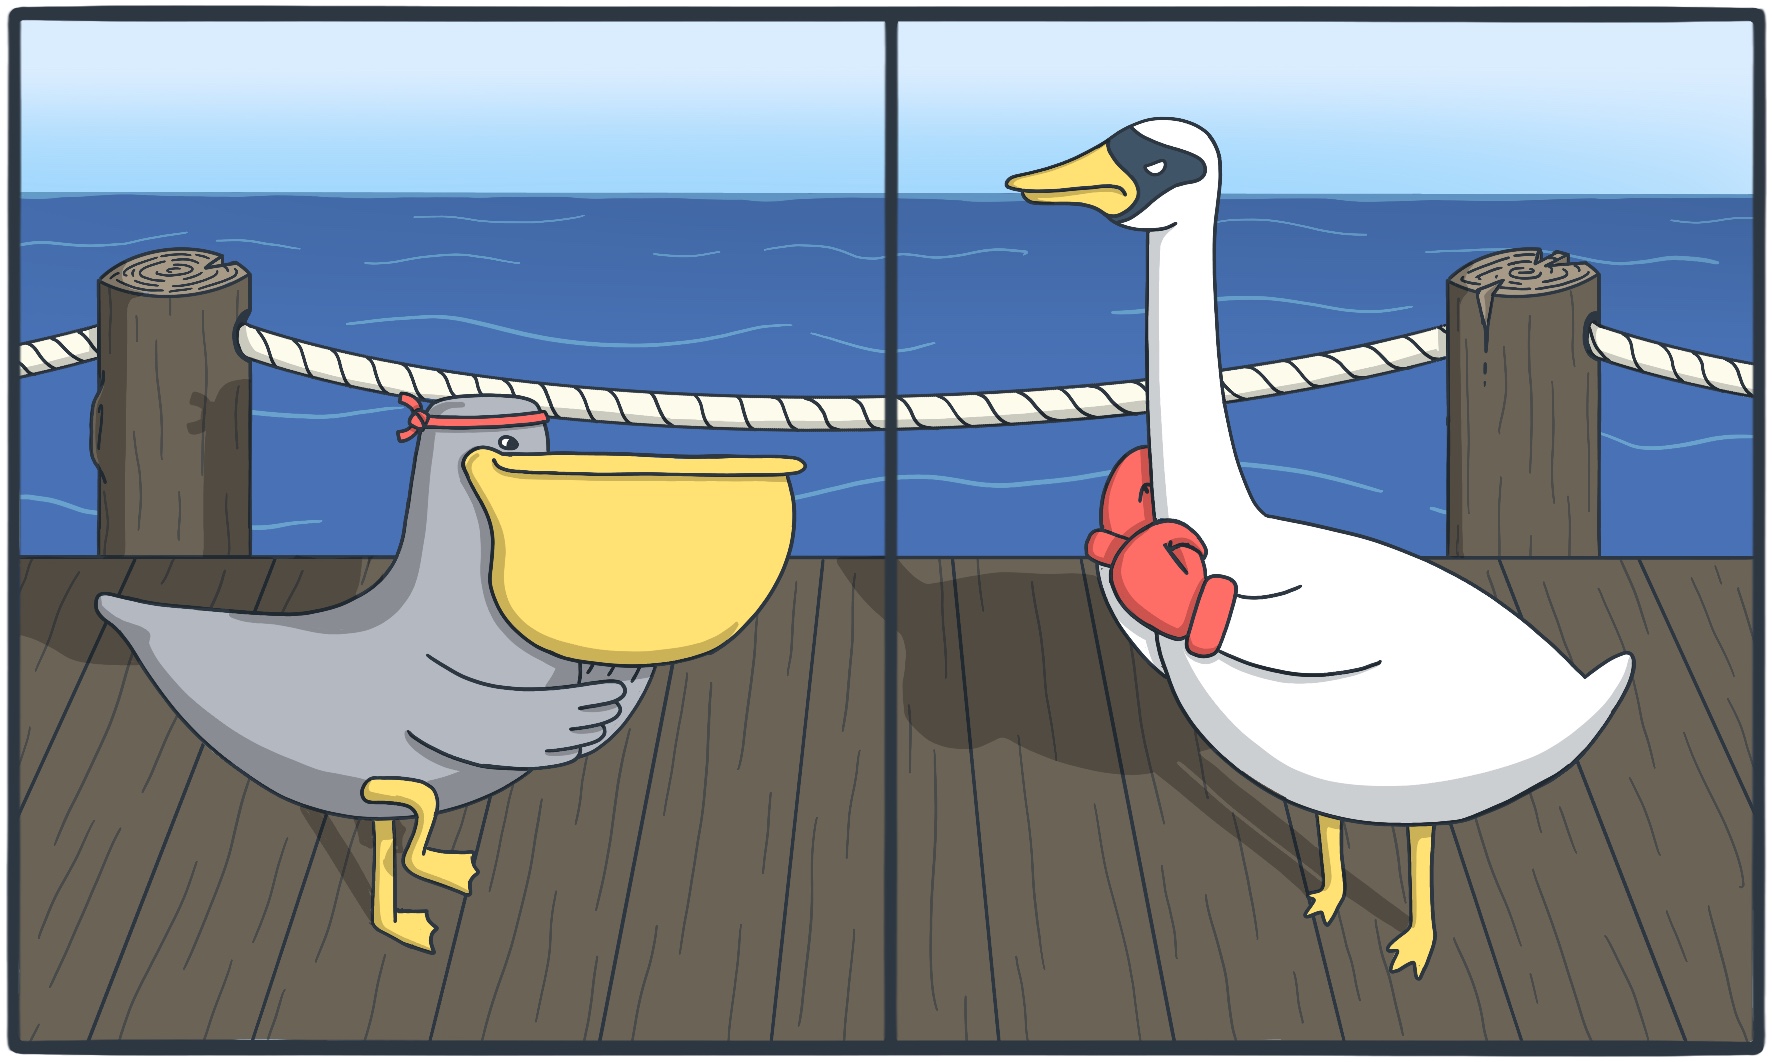 A pelican doing karate on one side and a swan with boxing gloves on the other